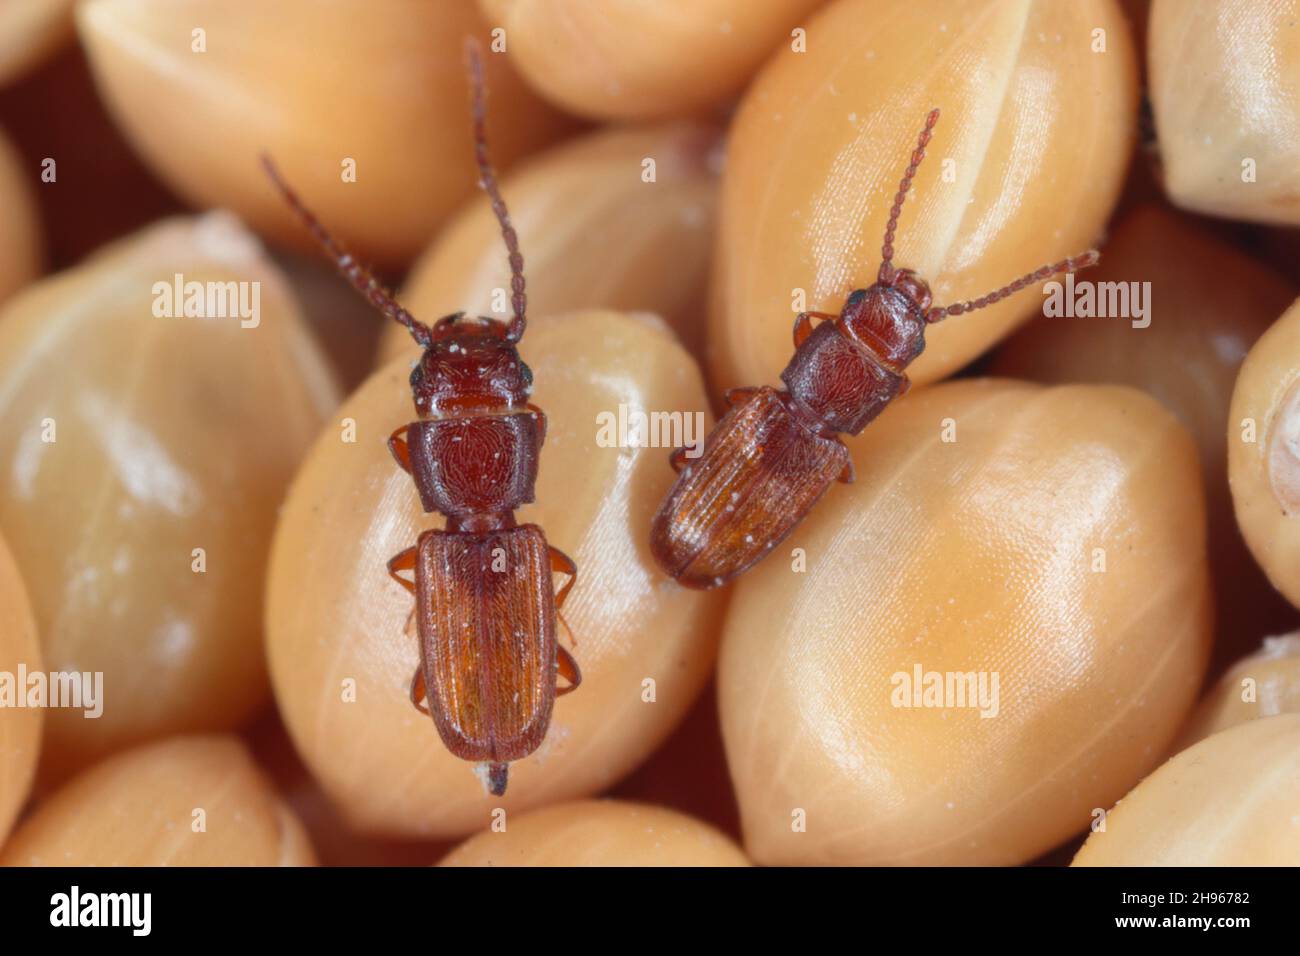 Rusty grain beetle Cryptolestes ferrugineus from the family Laemophloeidae (lined flat bark beetles), known as economically important pests. Stock Photo